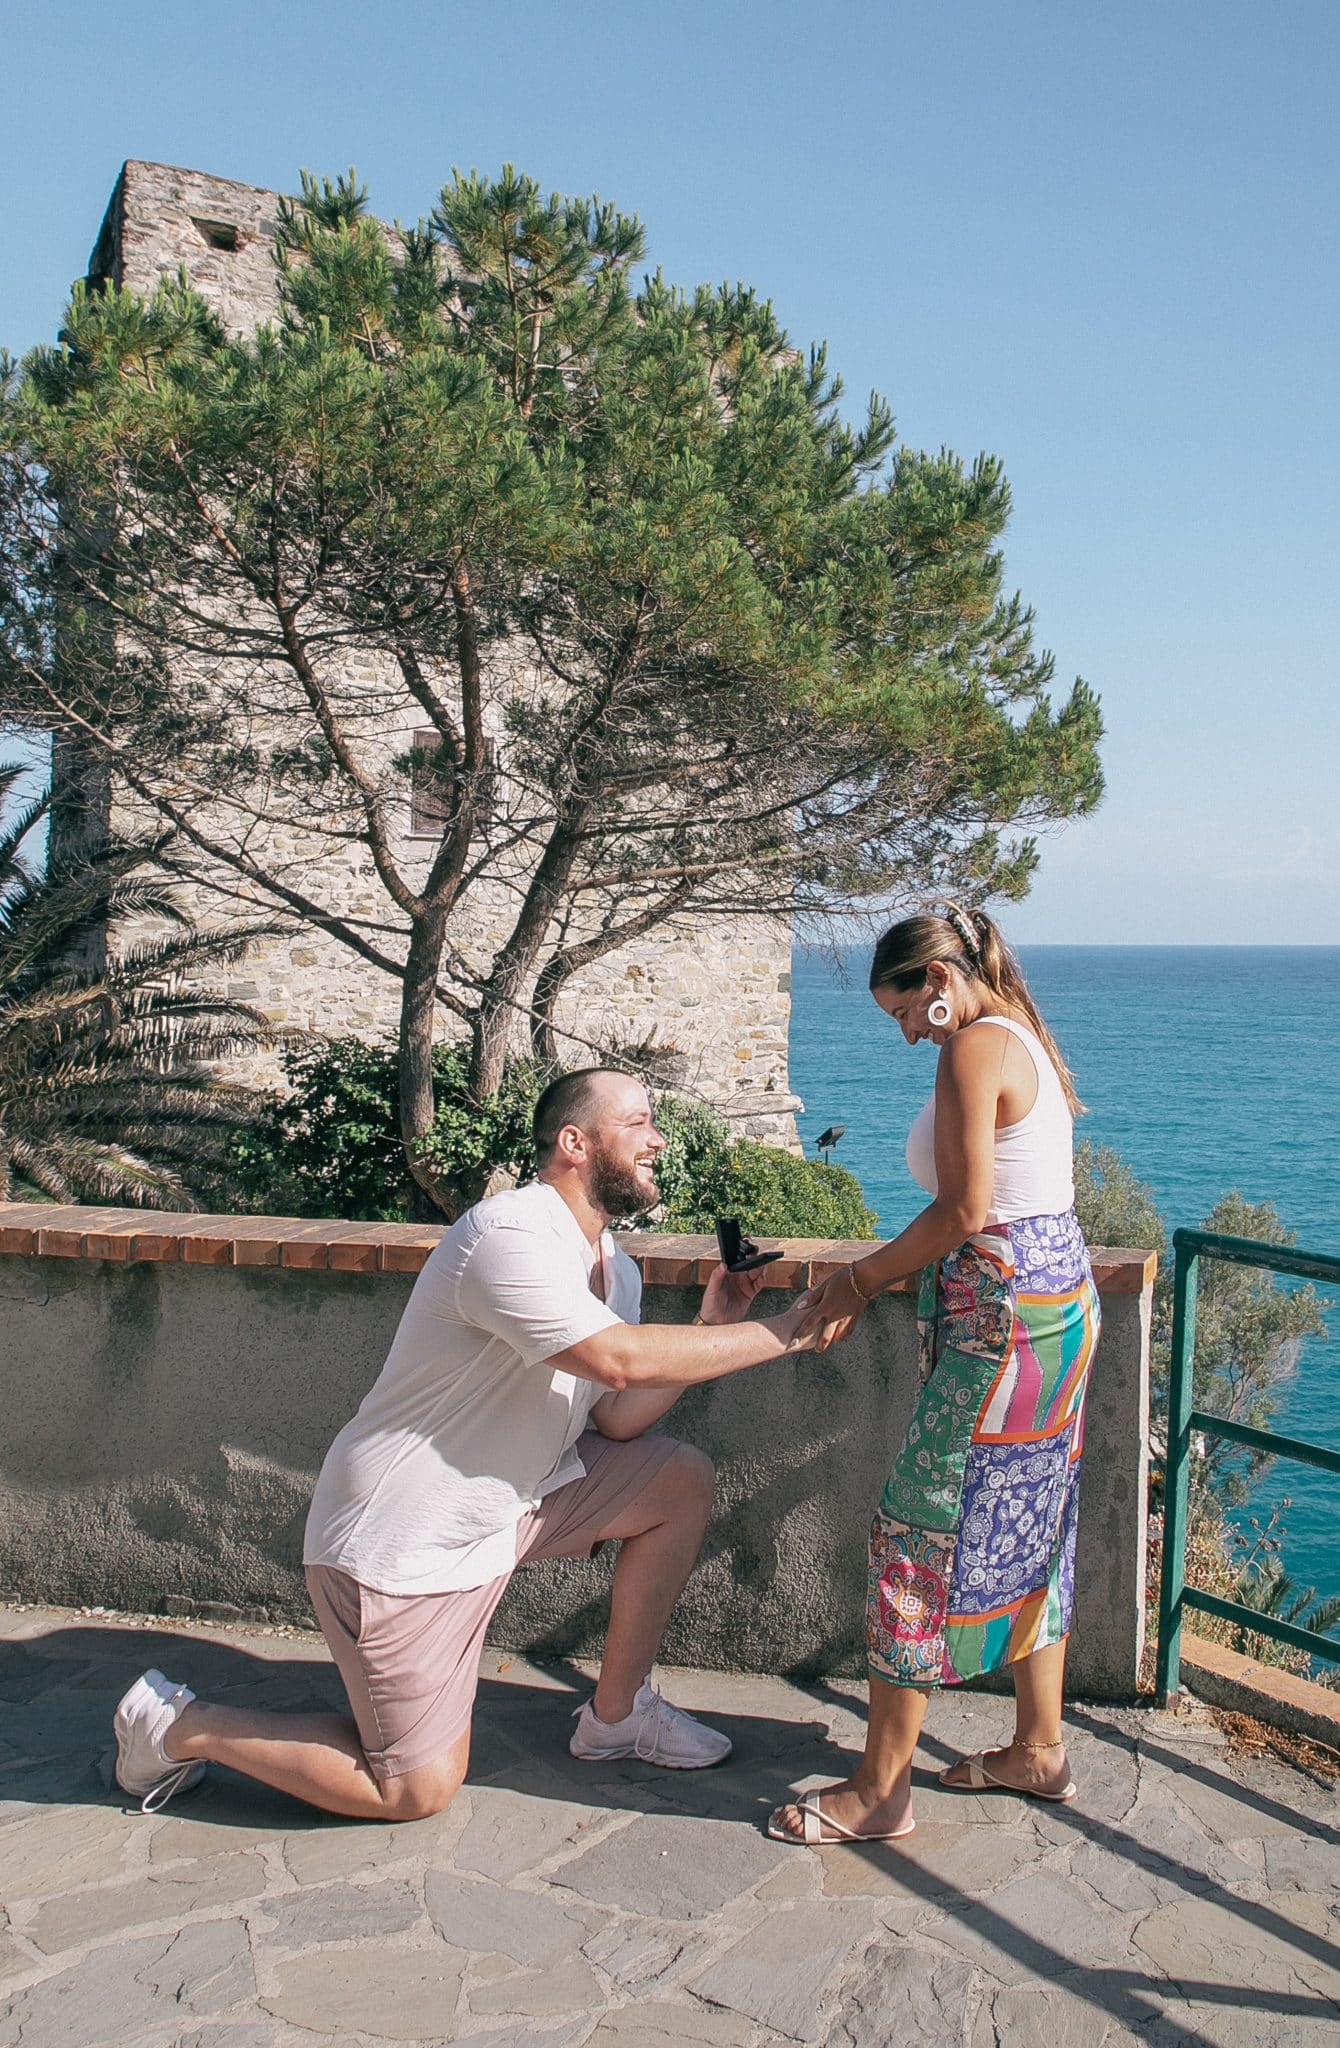 Christian is down on one knee for a surprise proposal in Italy to Nicolle